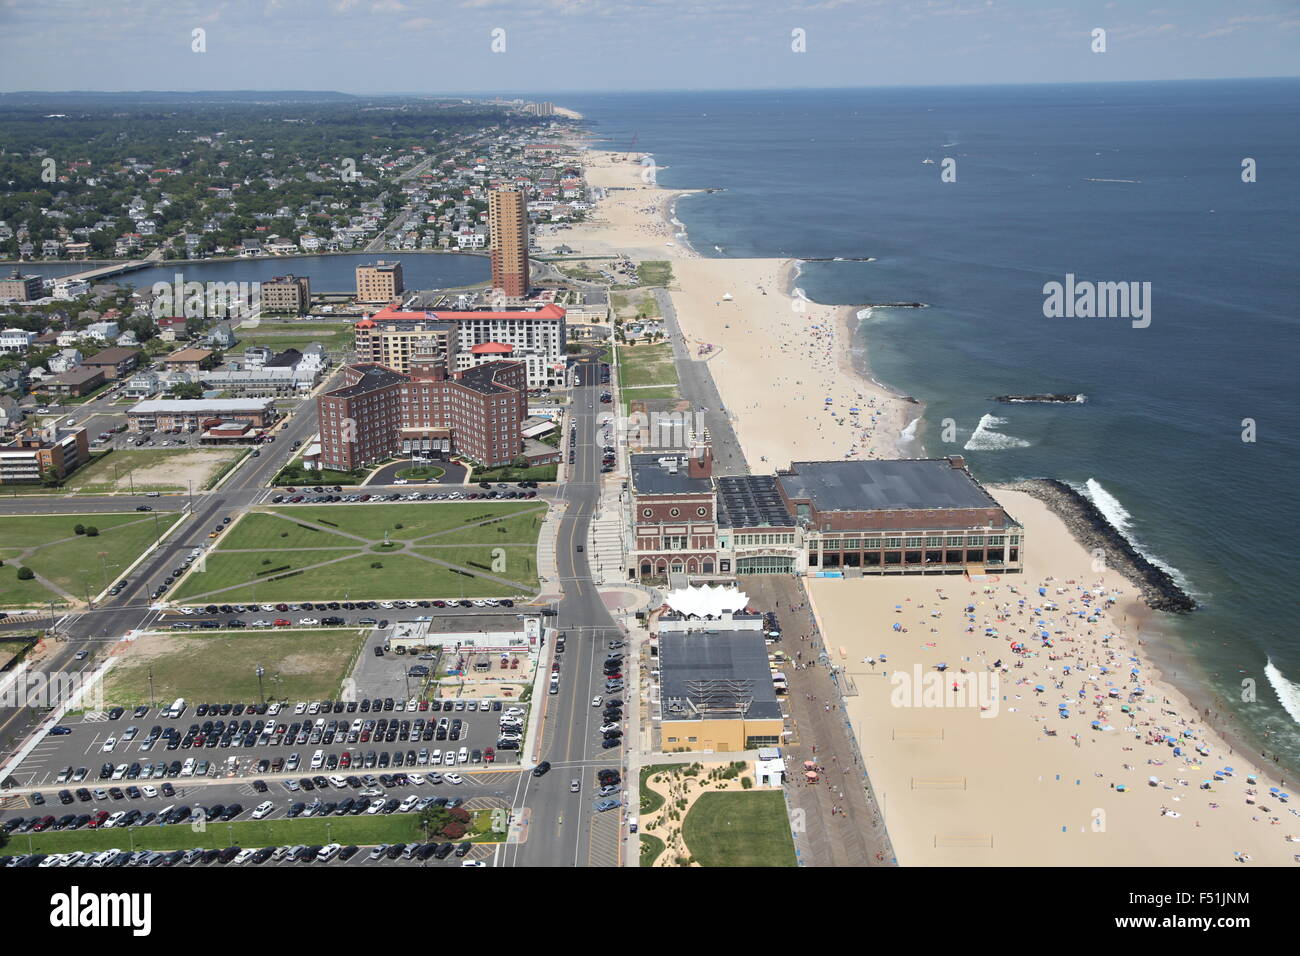 https://c8.alamy.com/comp/F51JNM/aerial-view-of-asbury-park-beach-and-convention-hall-monmouth-county-F51JNM.jpg